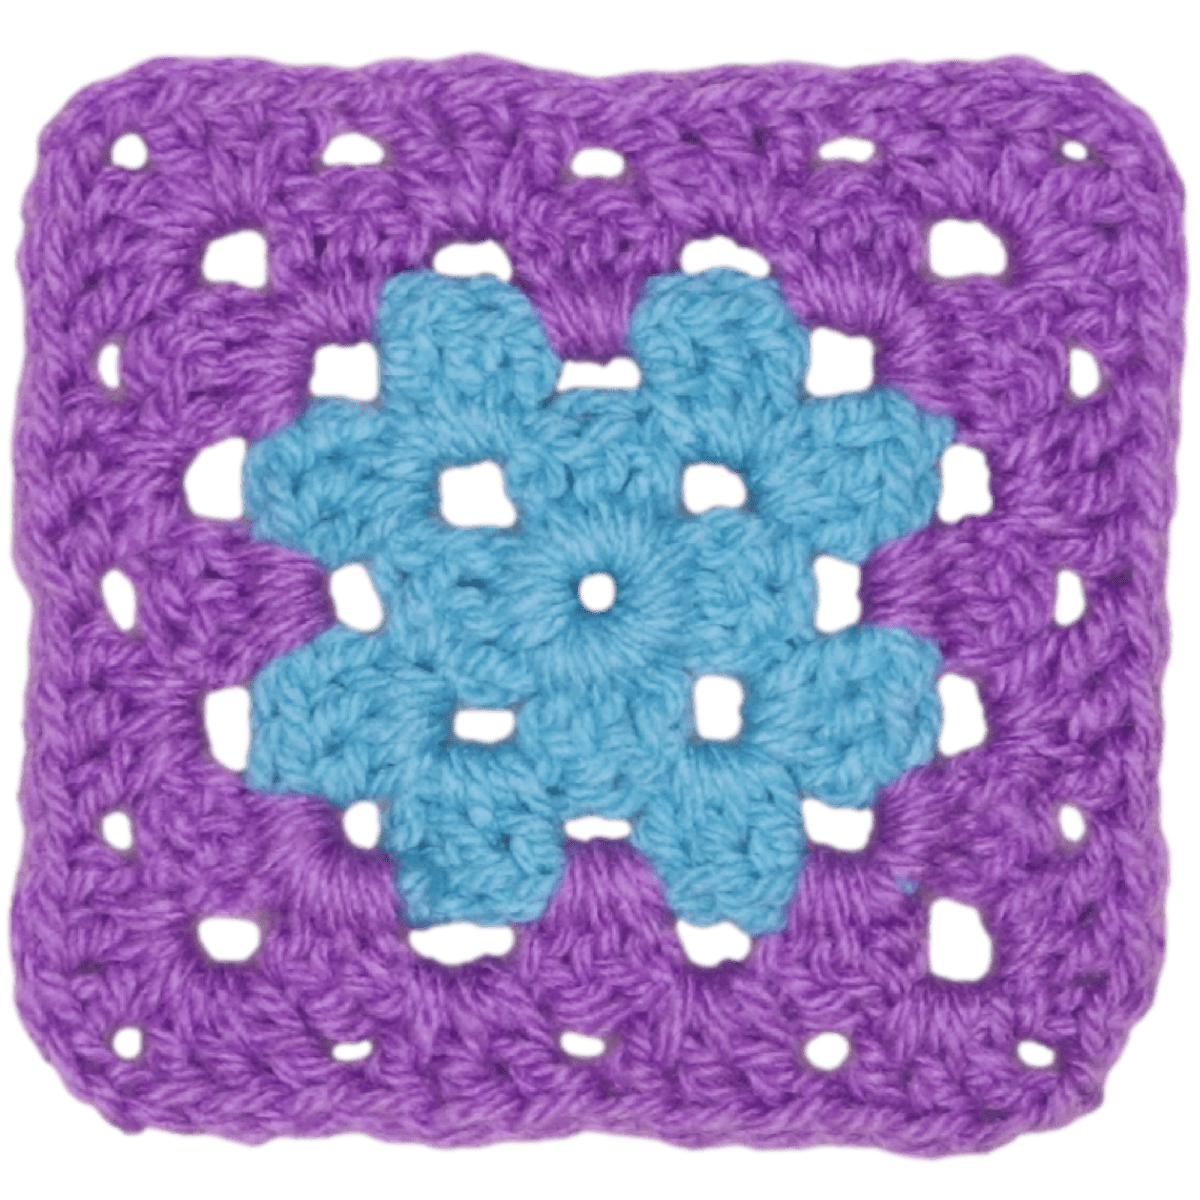 How to Crochet a Granny Square - The Ultimate Step by Step Guide! - Secret Yarnery